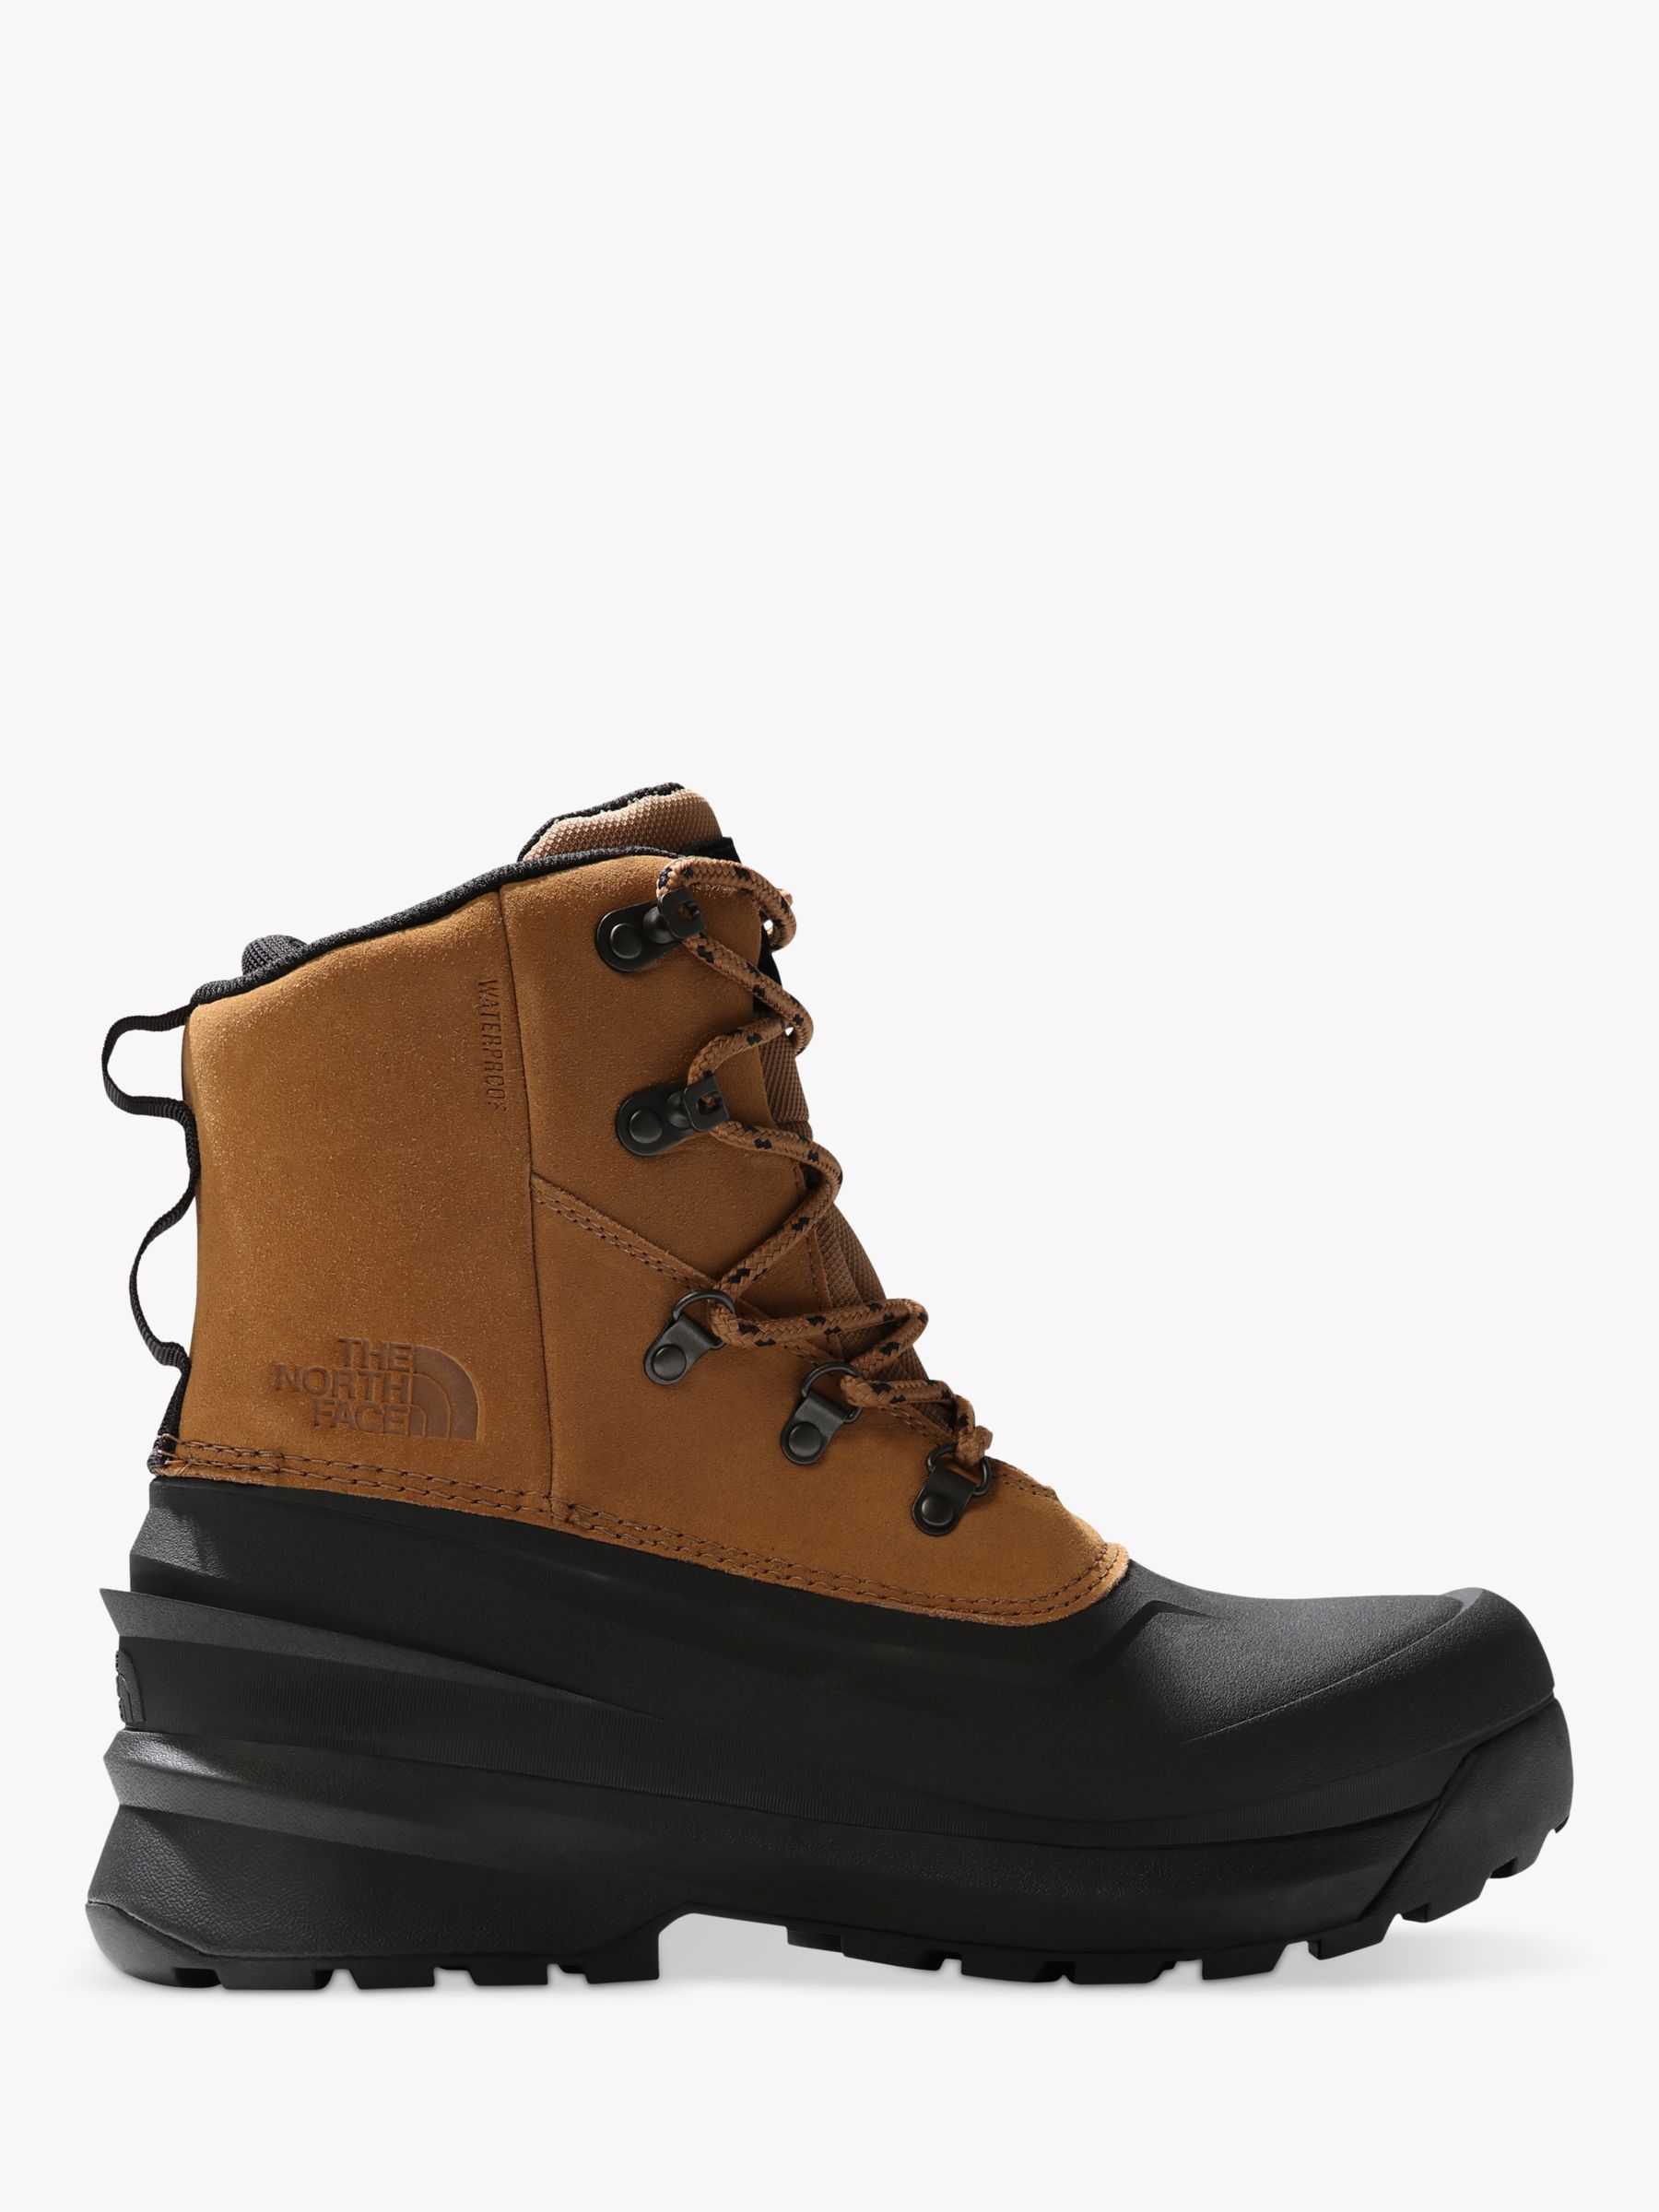 Buy The North Face Chilkat V Men's Waterproof Hiking Boots, Utility Brown/TFN Black Online at johnlewis.com